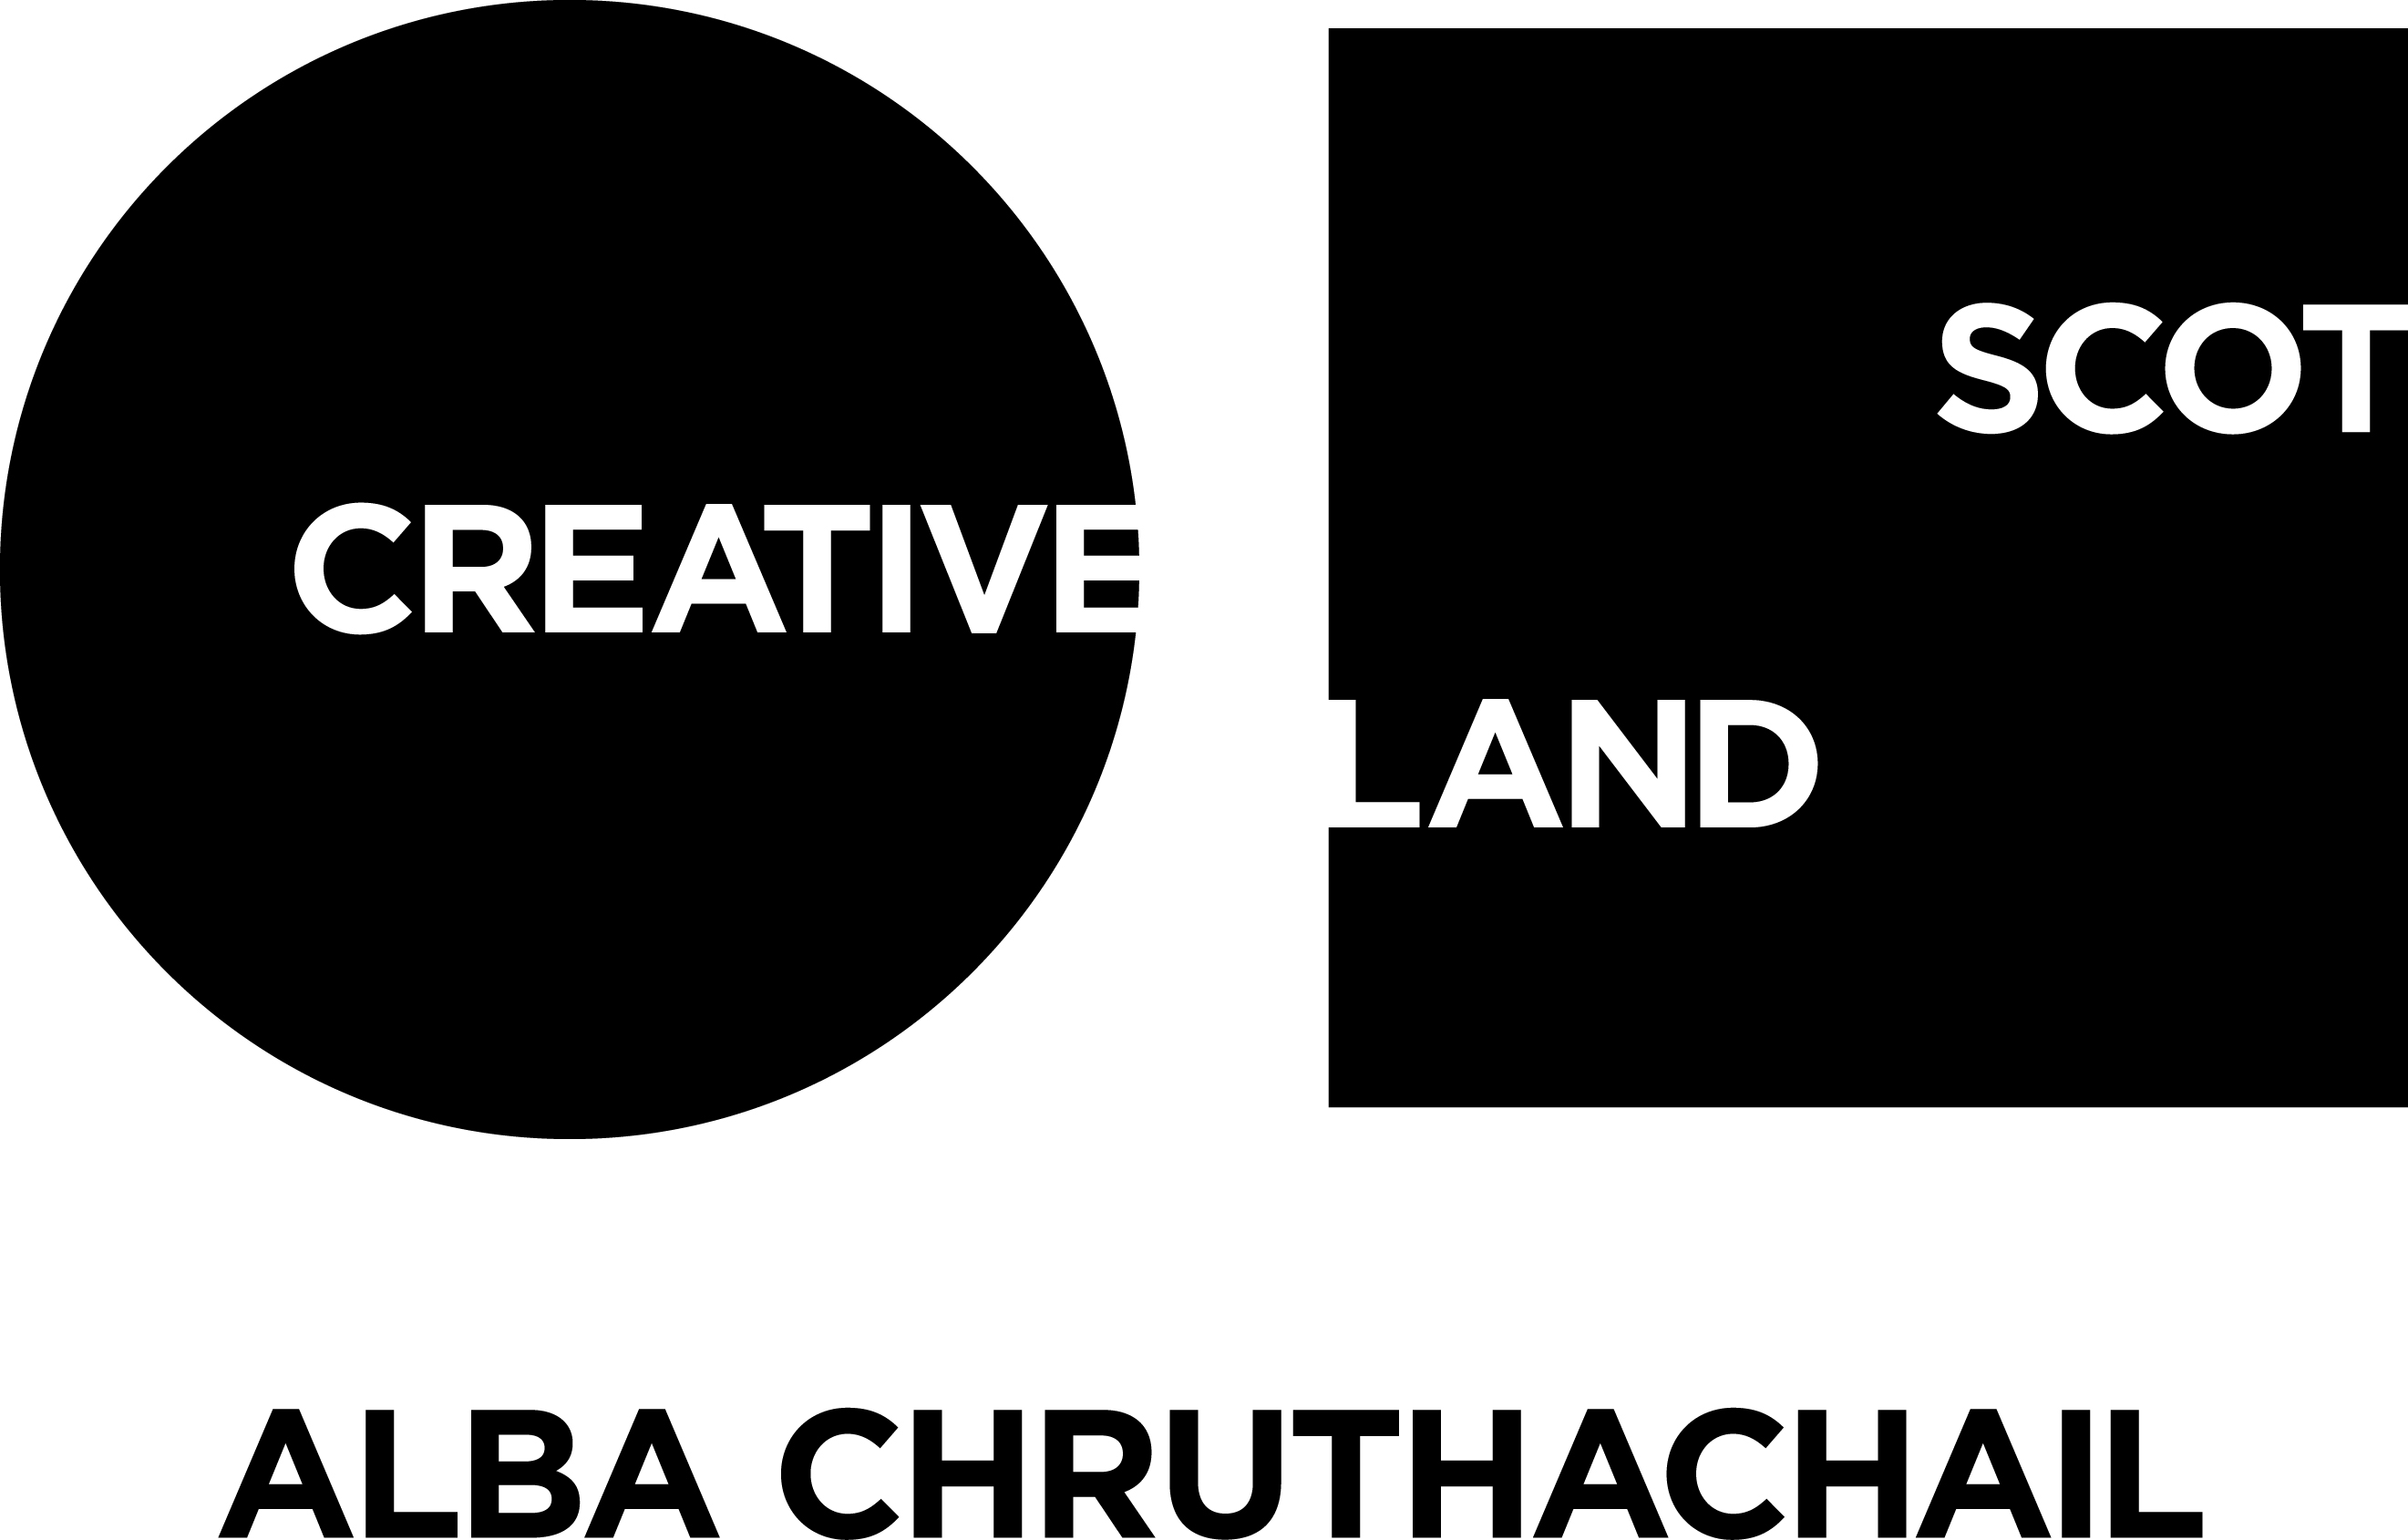 Logo of Creative Scotland with a black circle reading Creative in white and a black square reading Scot at the top and Land at the bottom. Black text underneath reads Alba Chruthachail